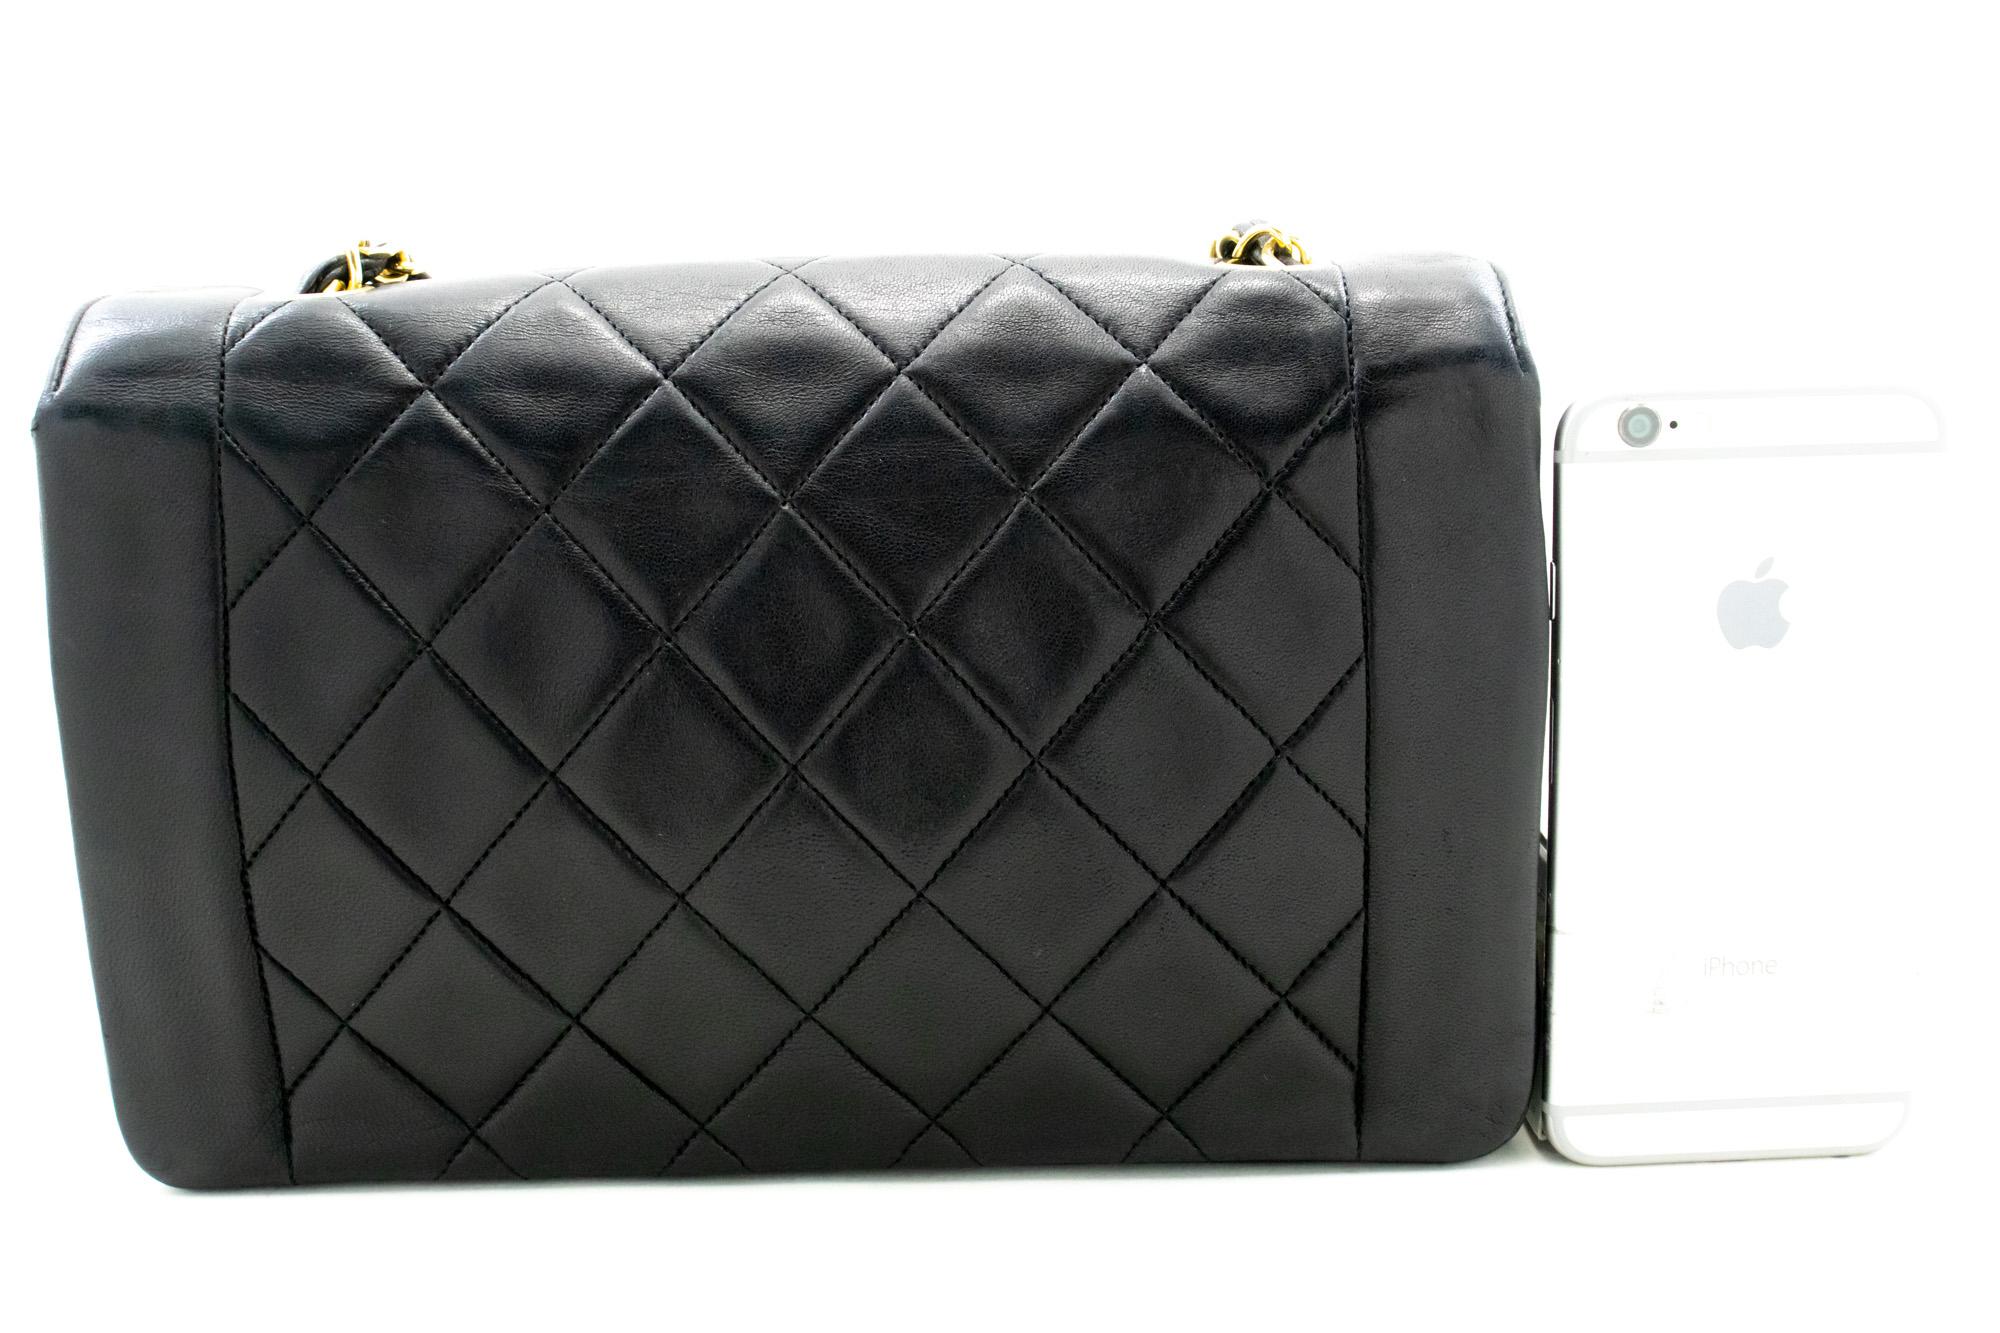 CHANEL Diana Chain Flap Shoulder Bag Black Quilted Purse Lambskin In Good Condition For Sale In Takamatsu-shi, JP